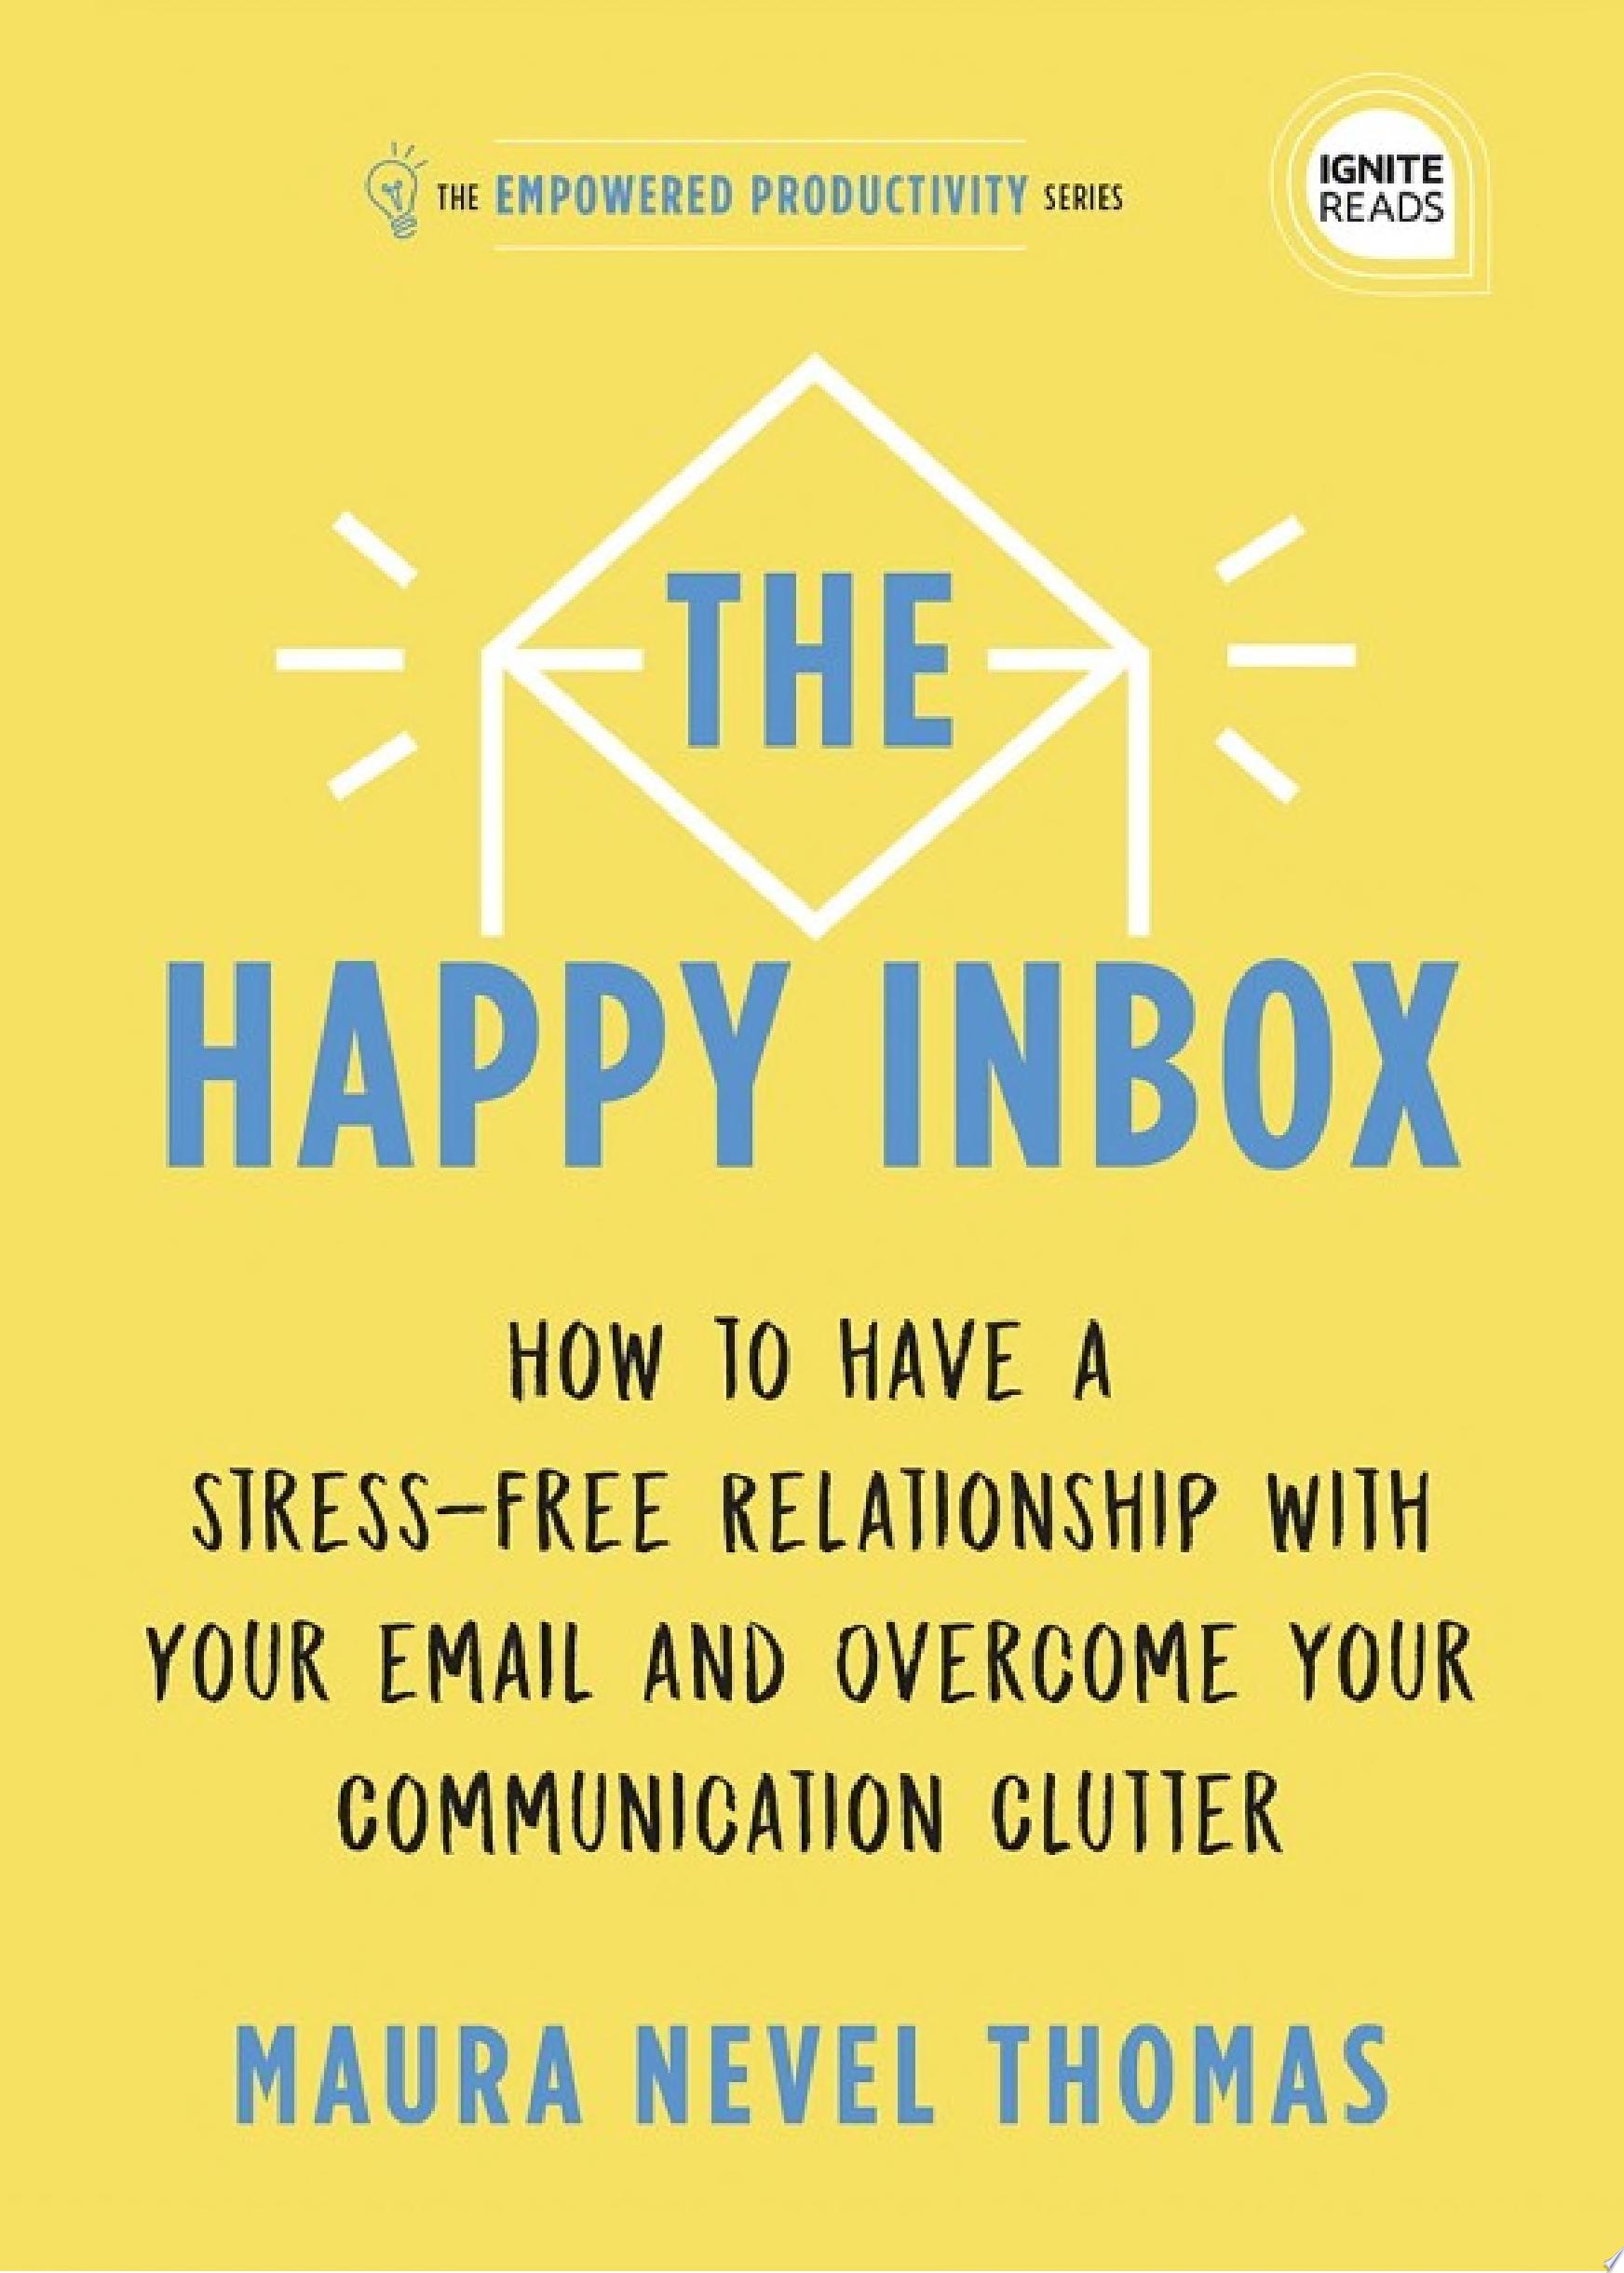 Image for "The Happy Inbox"